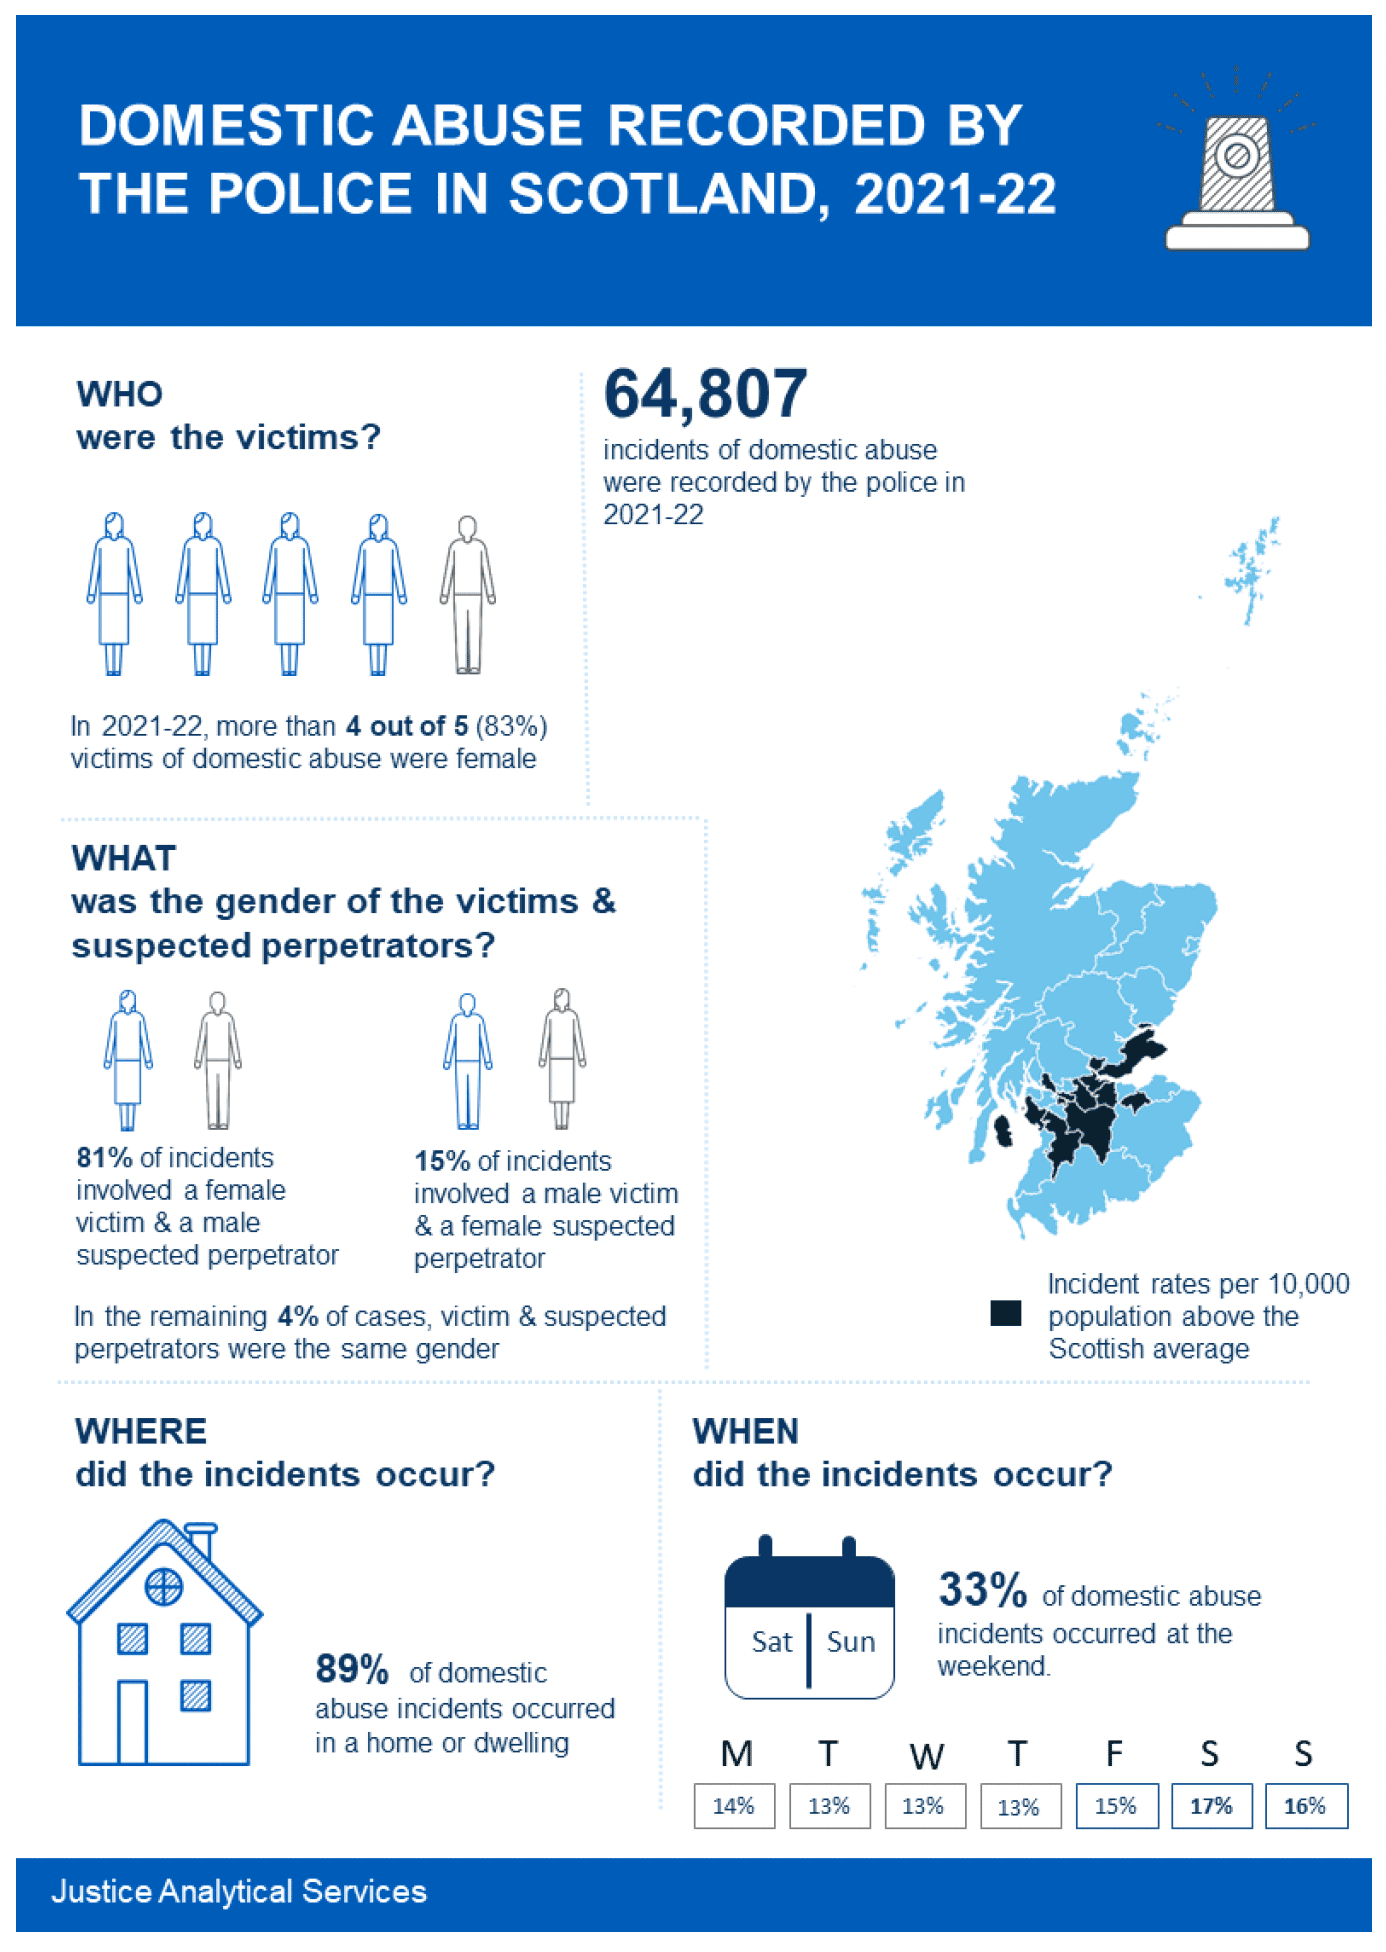 Infographic showing the main findings from the recent Domestic Abuse in Scotland publication for 2021-22. Last updated December 2022.